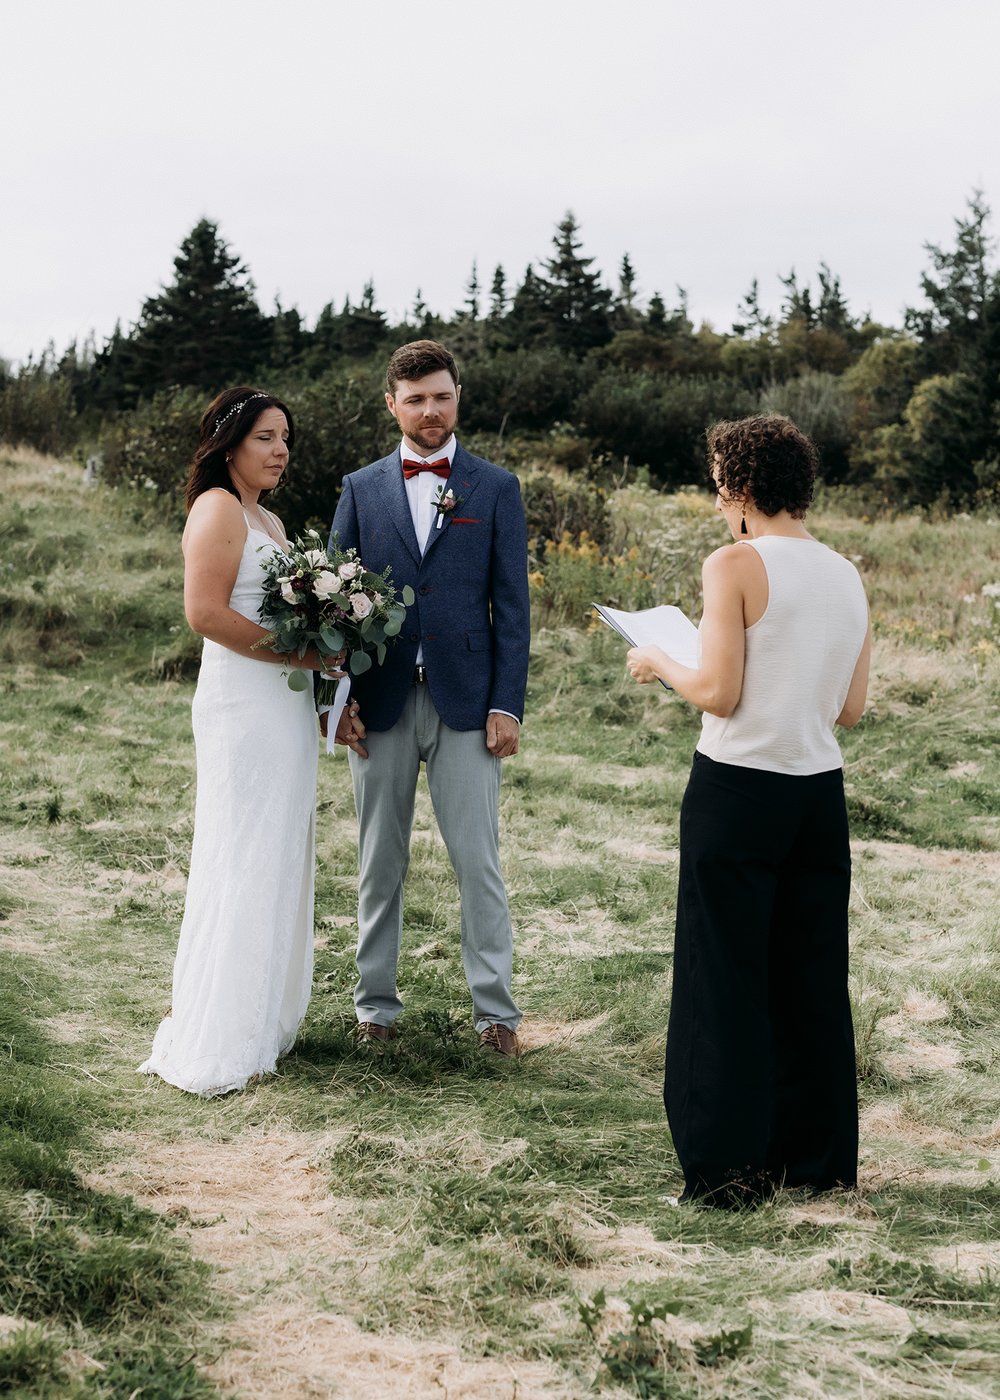 St Martins New Brunswick Elopement by Shannon-May Photography 006.jpg